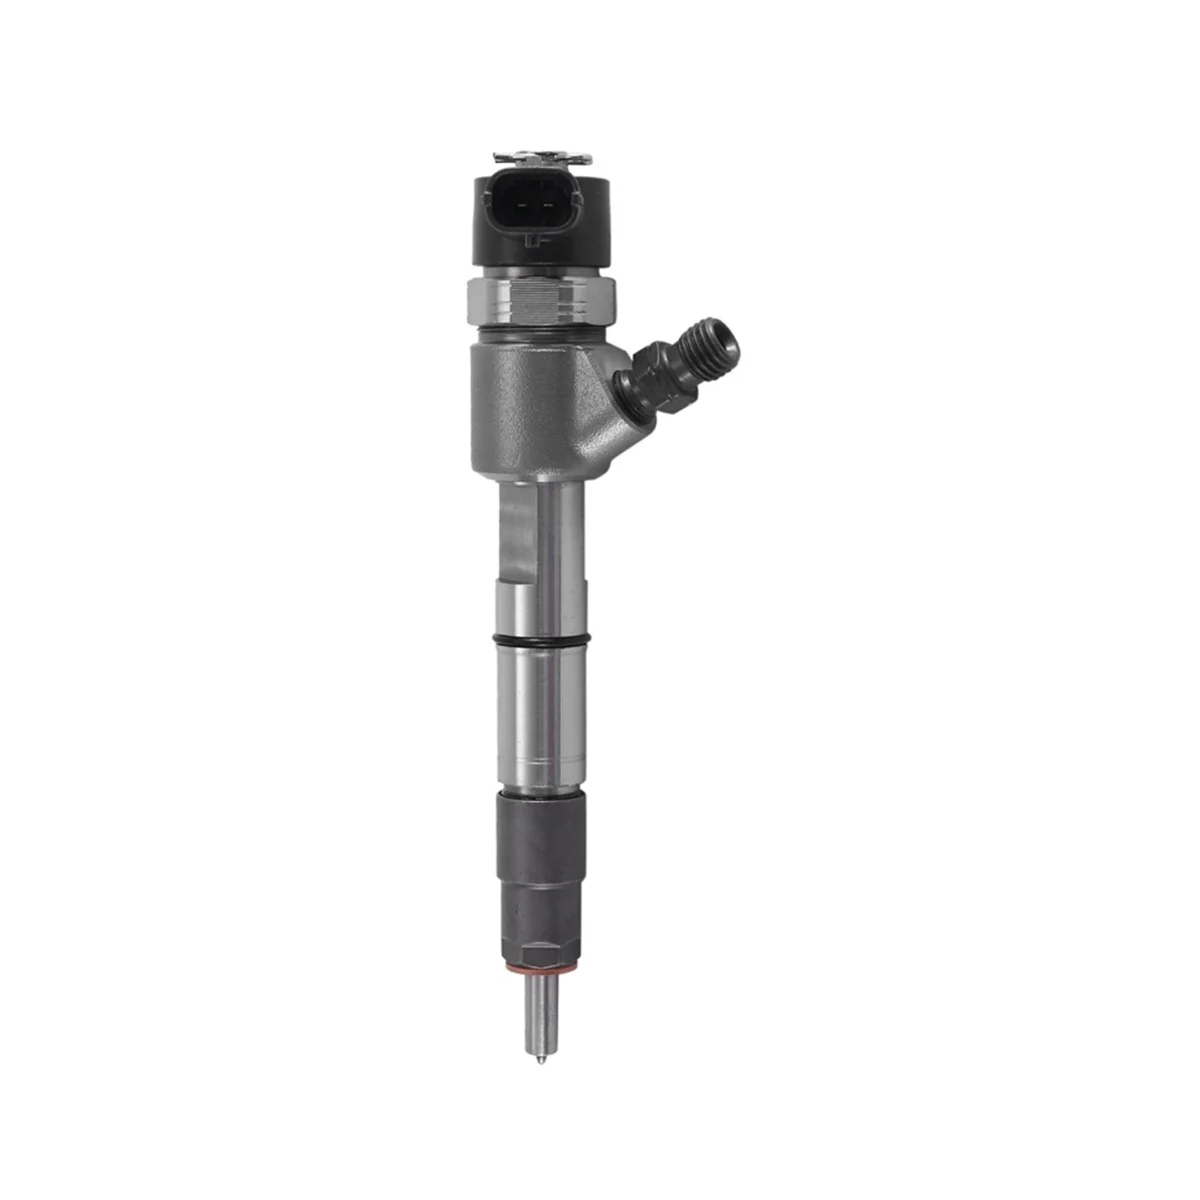 

0445110692 New Common Rail Diesel Fuel Injector Nozzle for CY4102 Chaochai JAC for Bosch